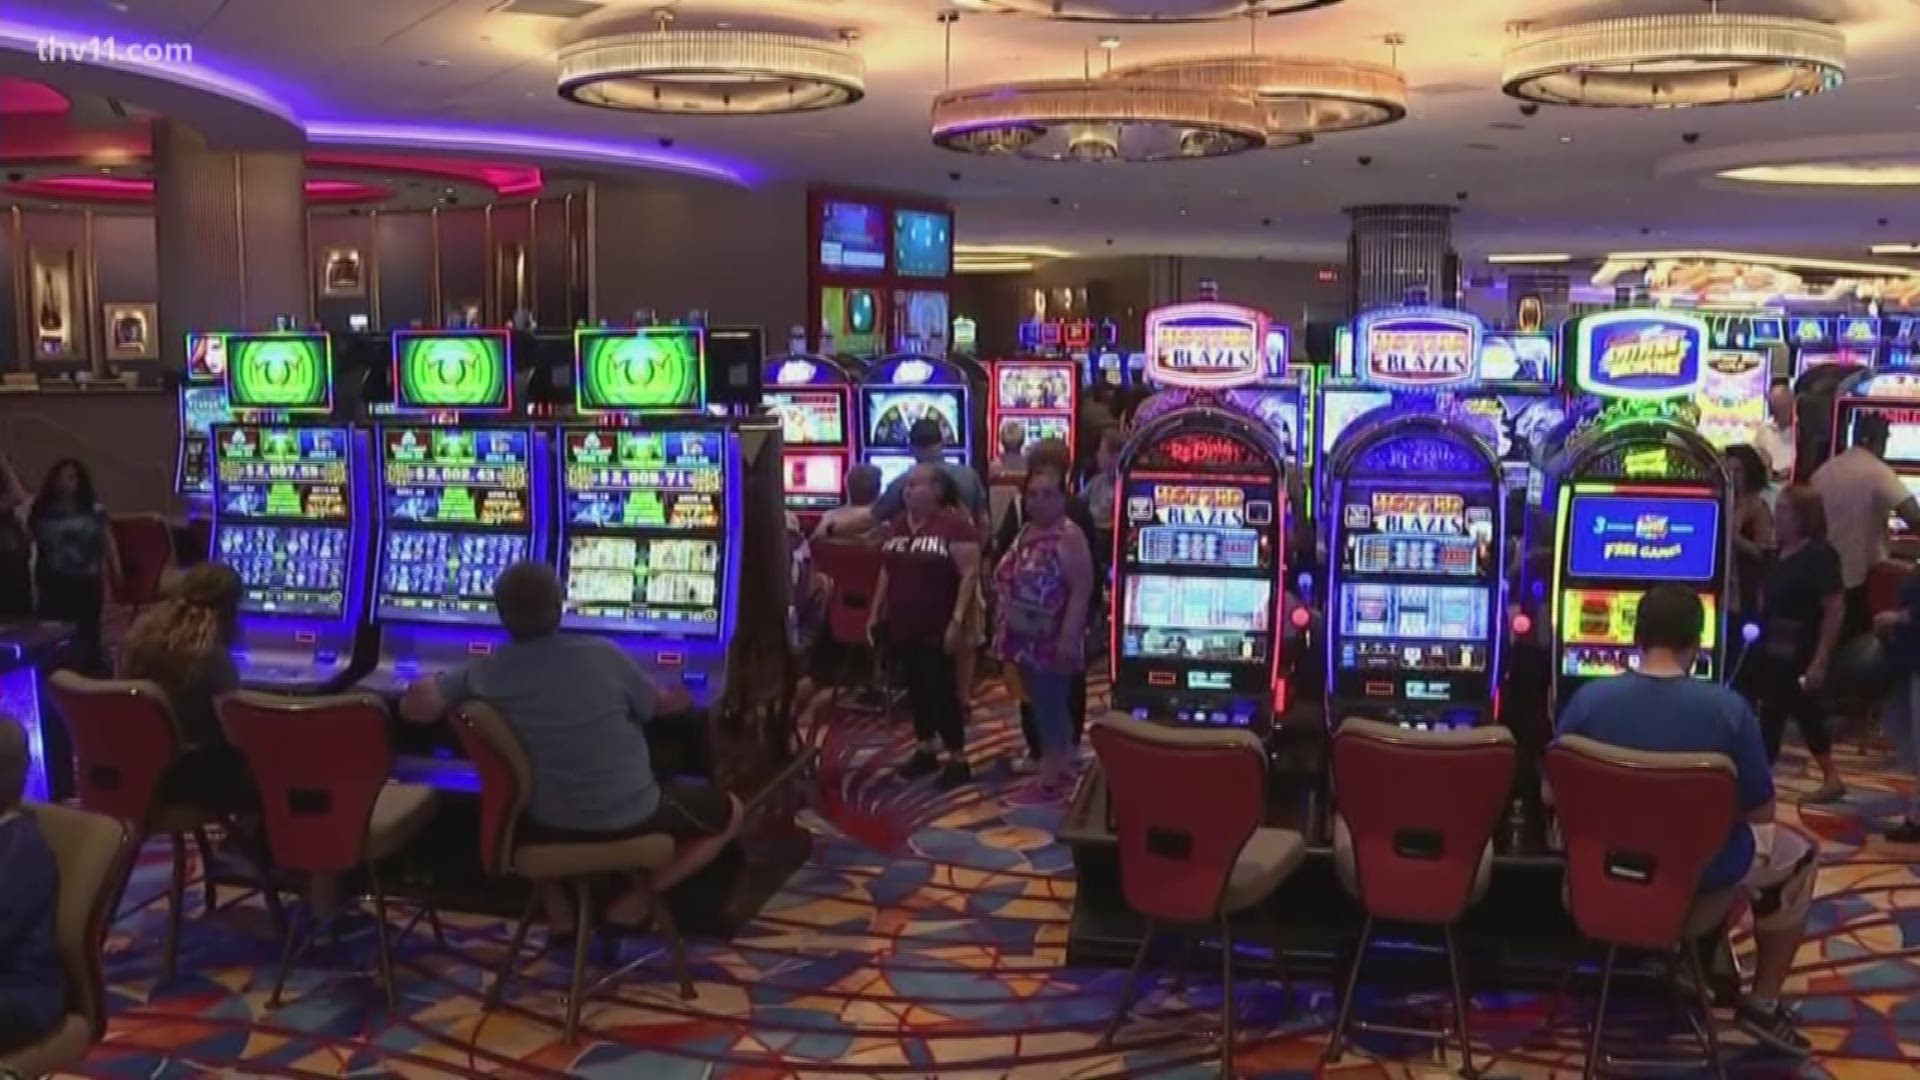 Nearly 9 months after Arkansas voted to allow gambling, the debate about casinos gets louder and louder in Pope County.